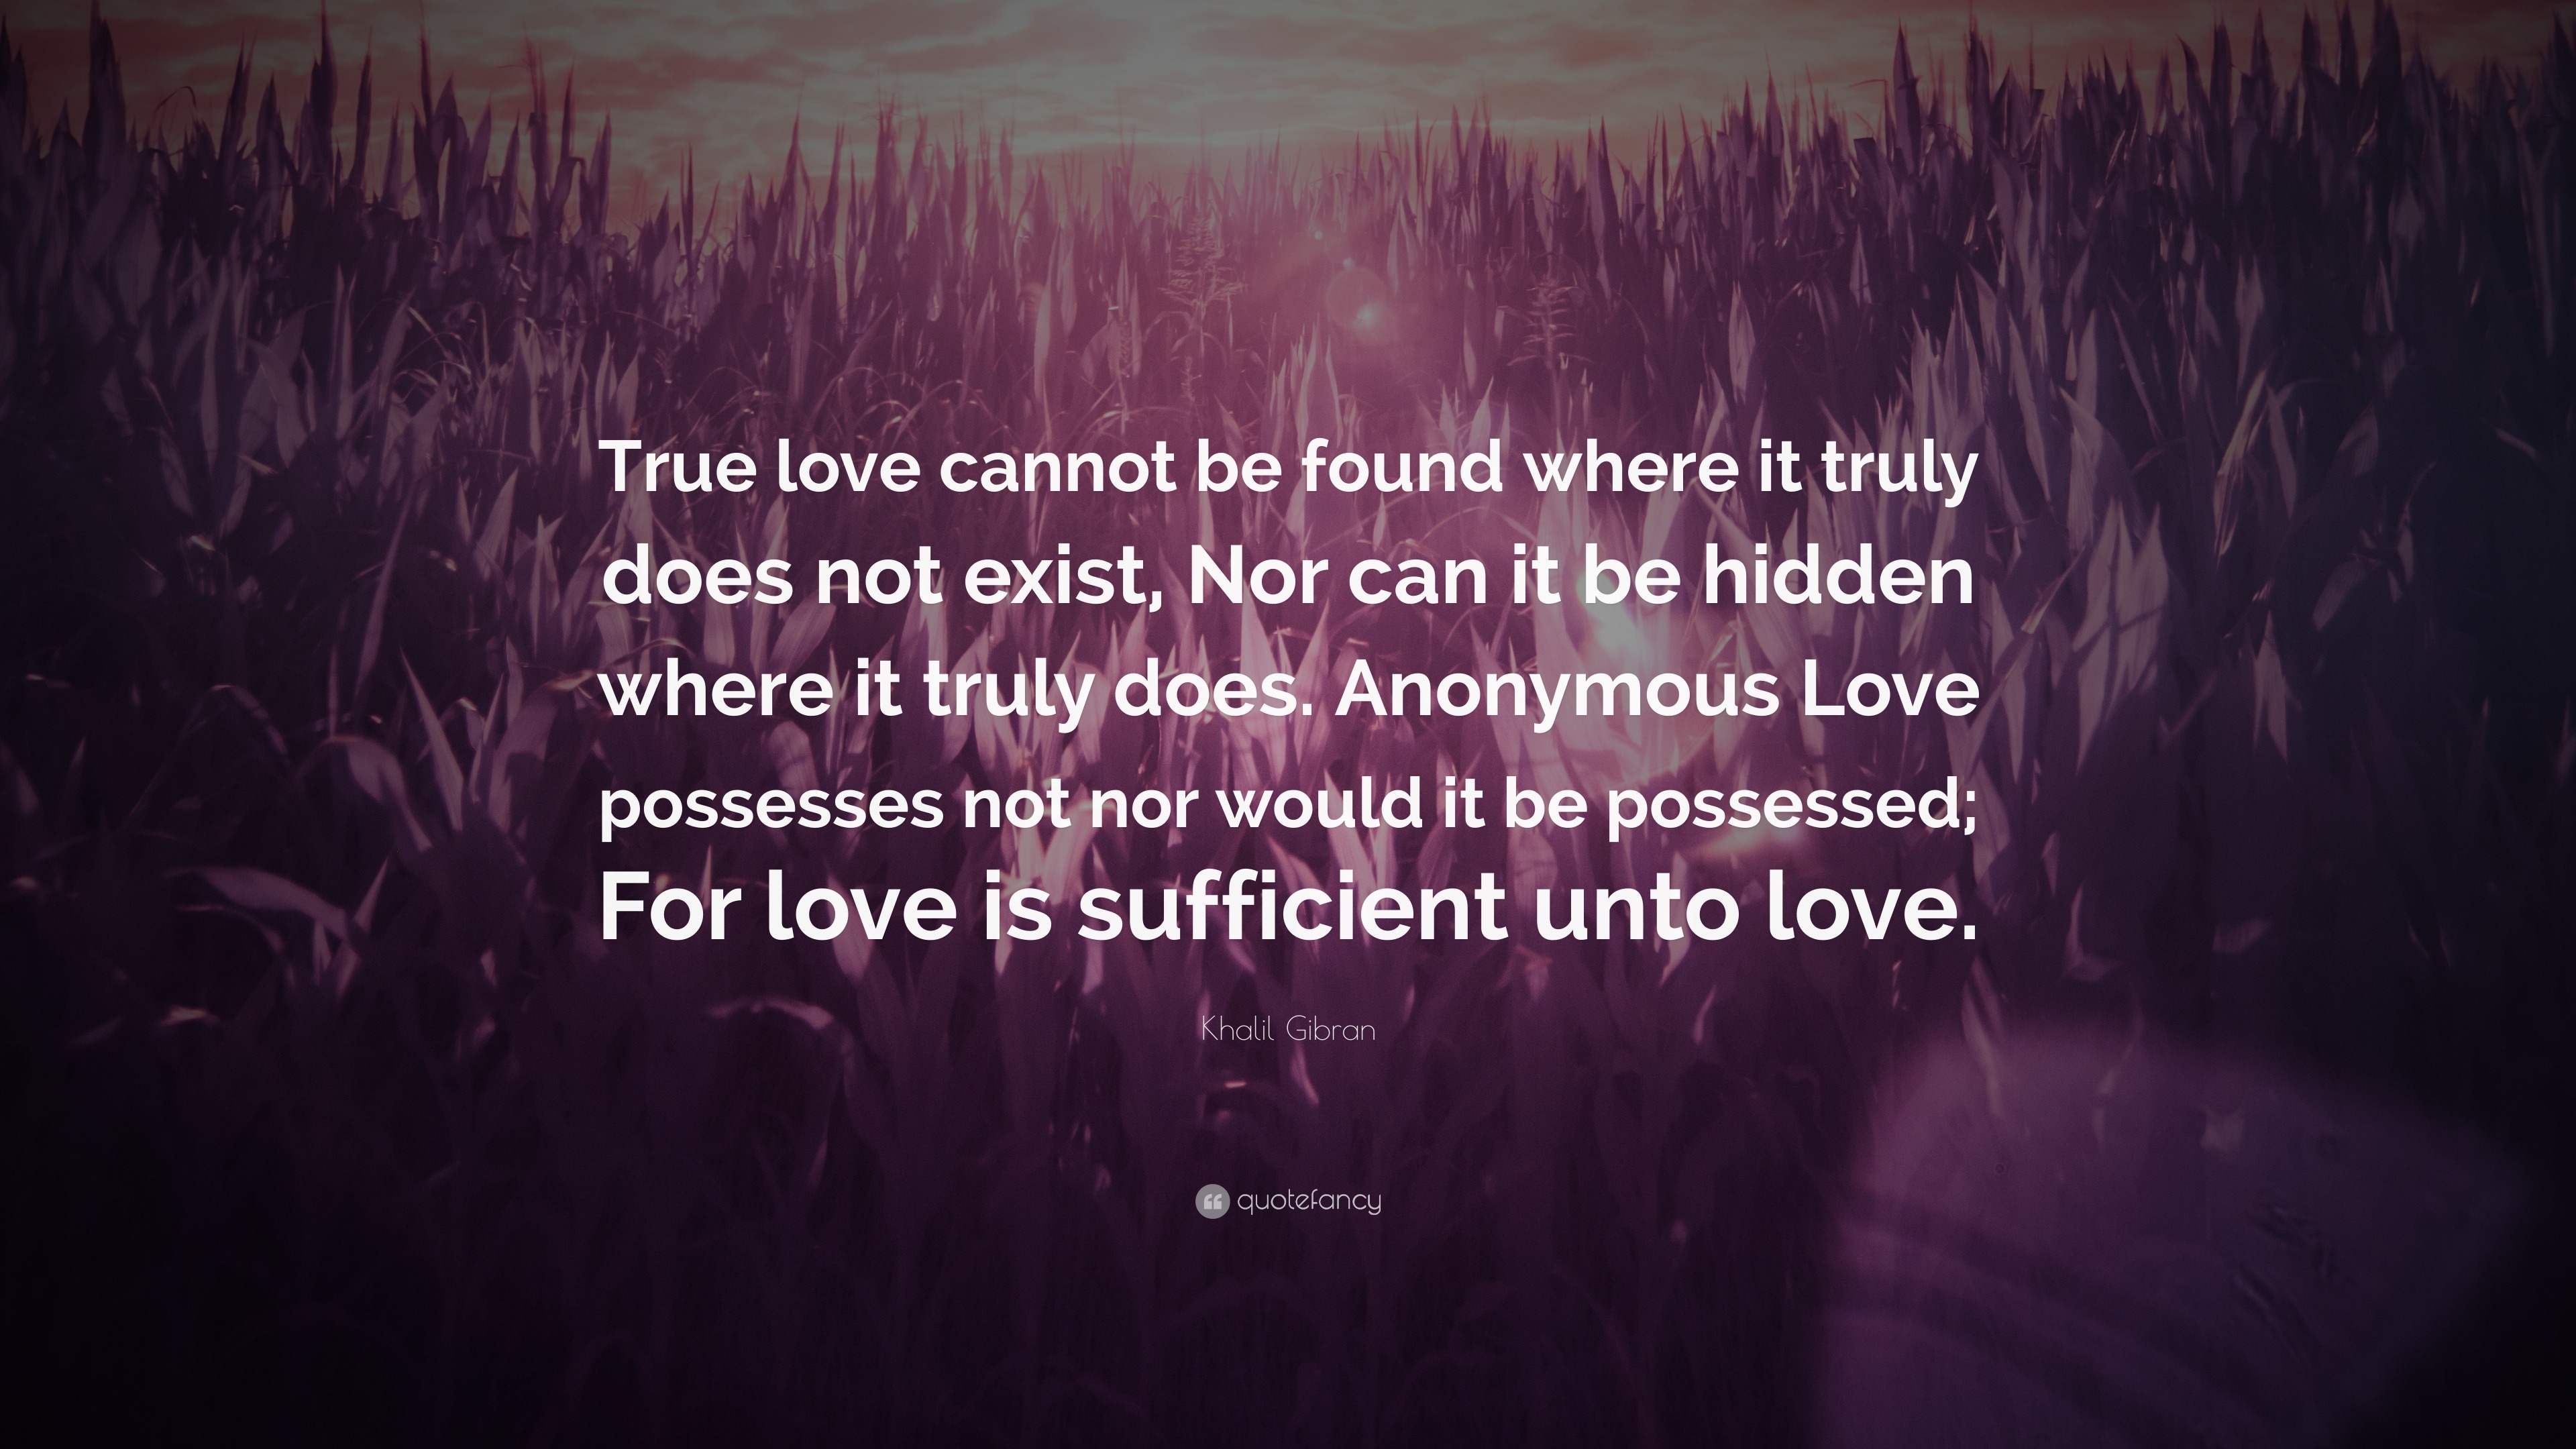 Khalil Gibran Quote “True love cannot be found where it truly does not exist